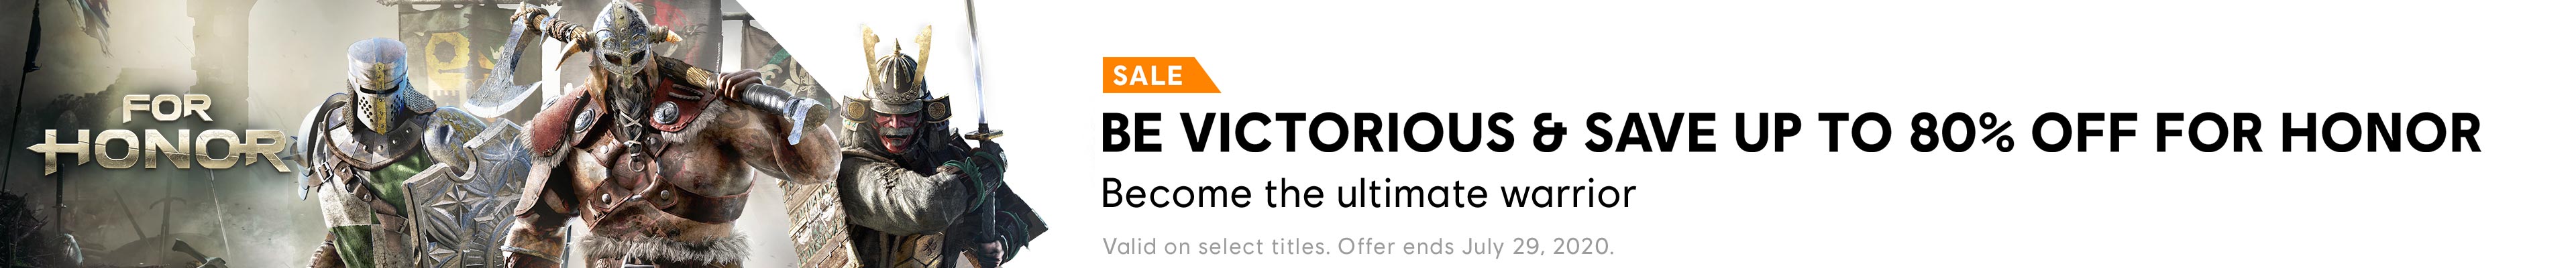 For Honor Sale Category banner